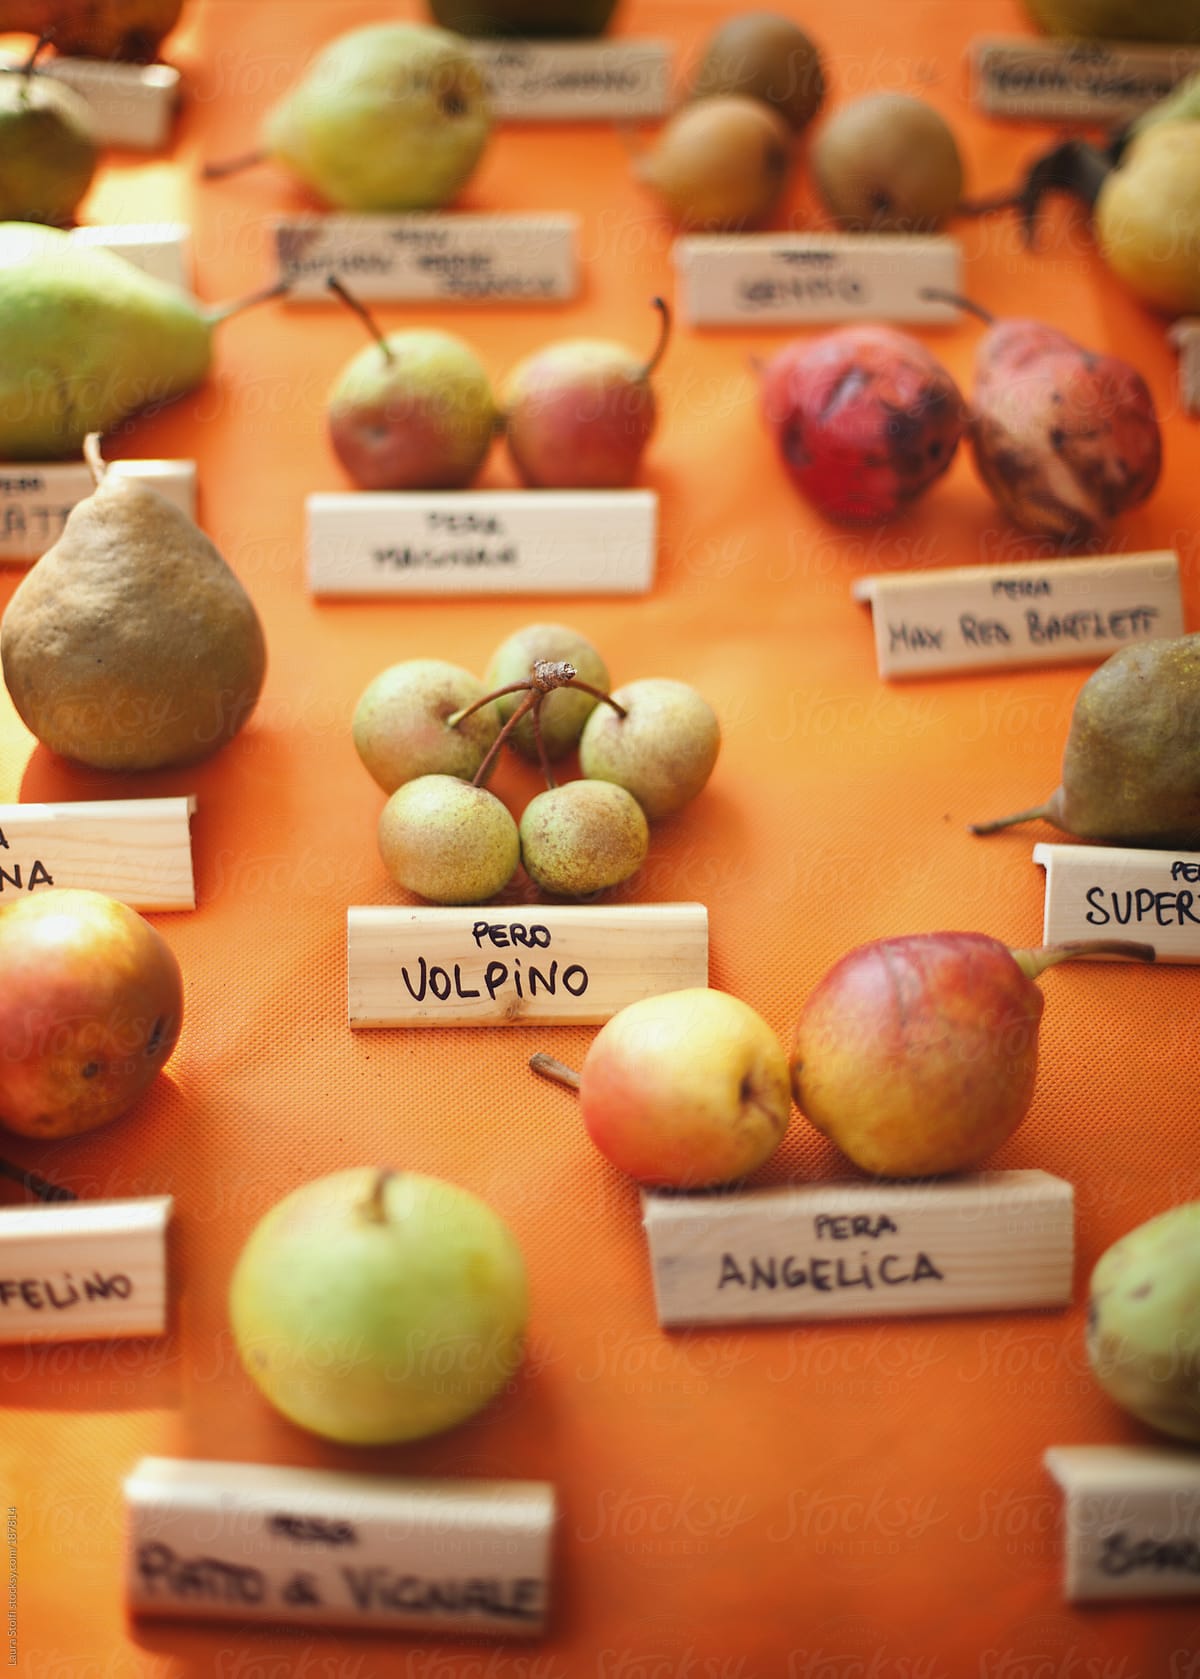 Uncommon cultivars of pears show